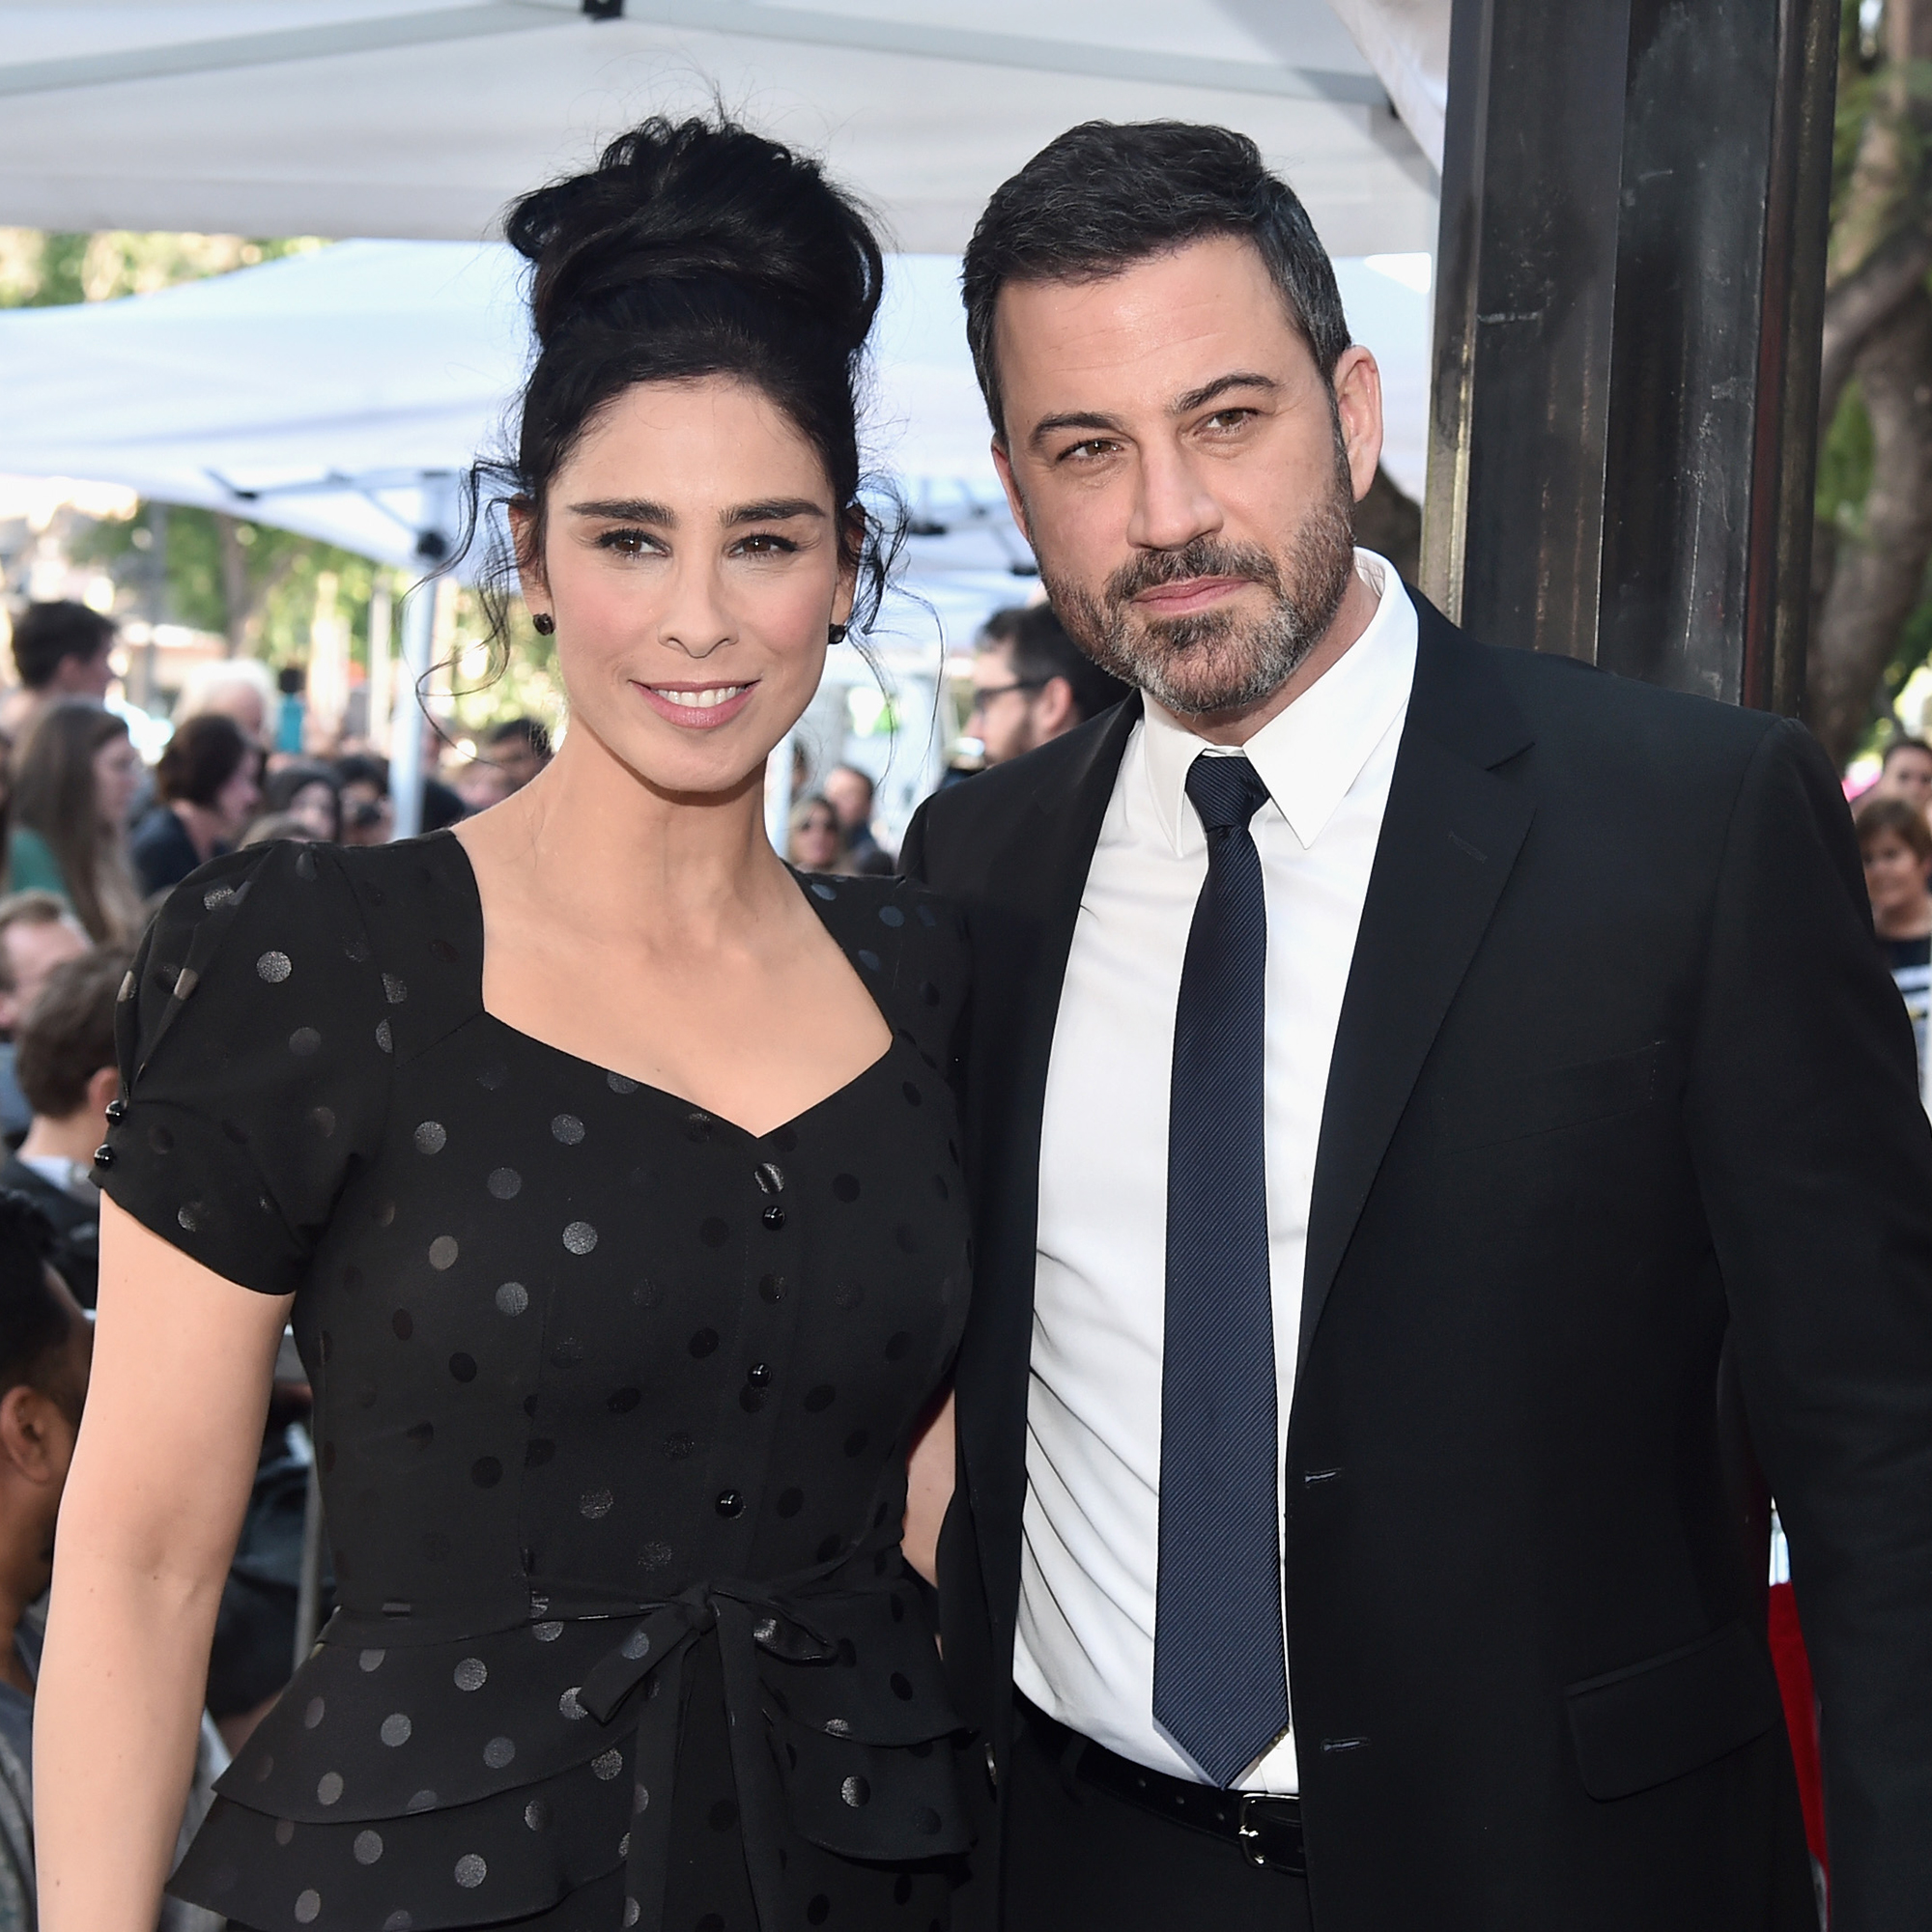 Jimmy Kimmel Friendship With Ex Sarah Silverman Took Some Time pic